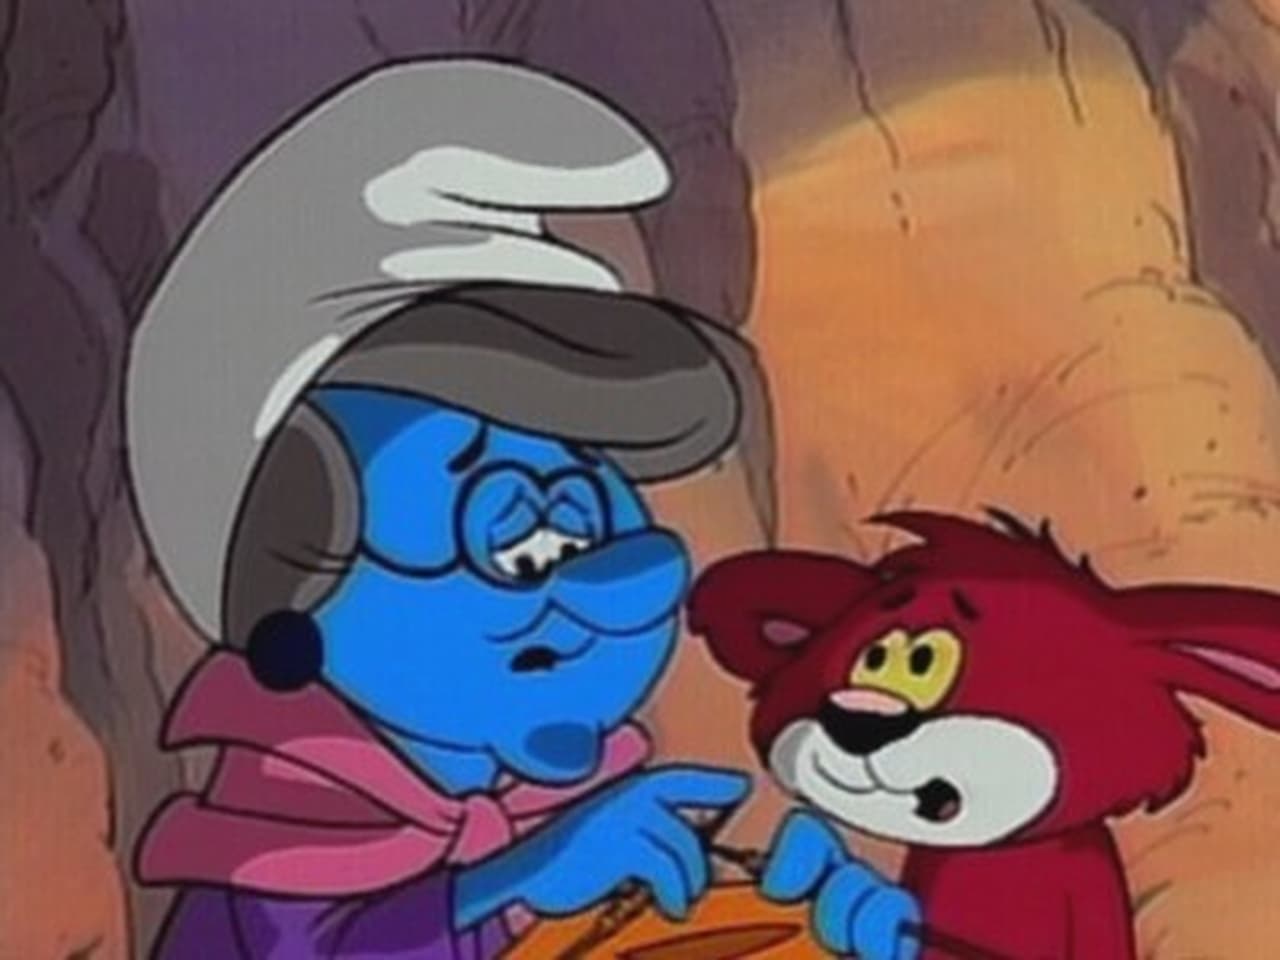 Nanny Saves The Smurfs From Gargamel And Is Praised. 